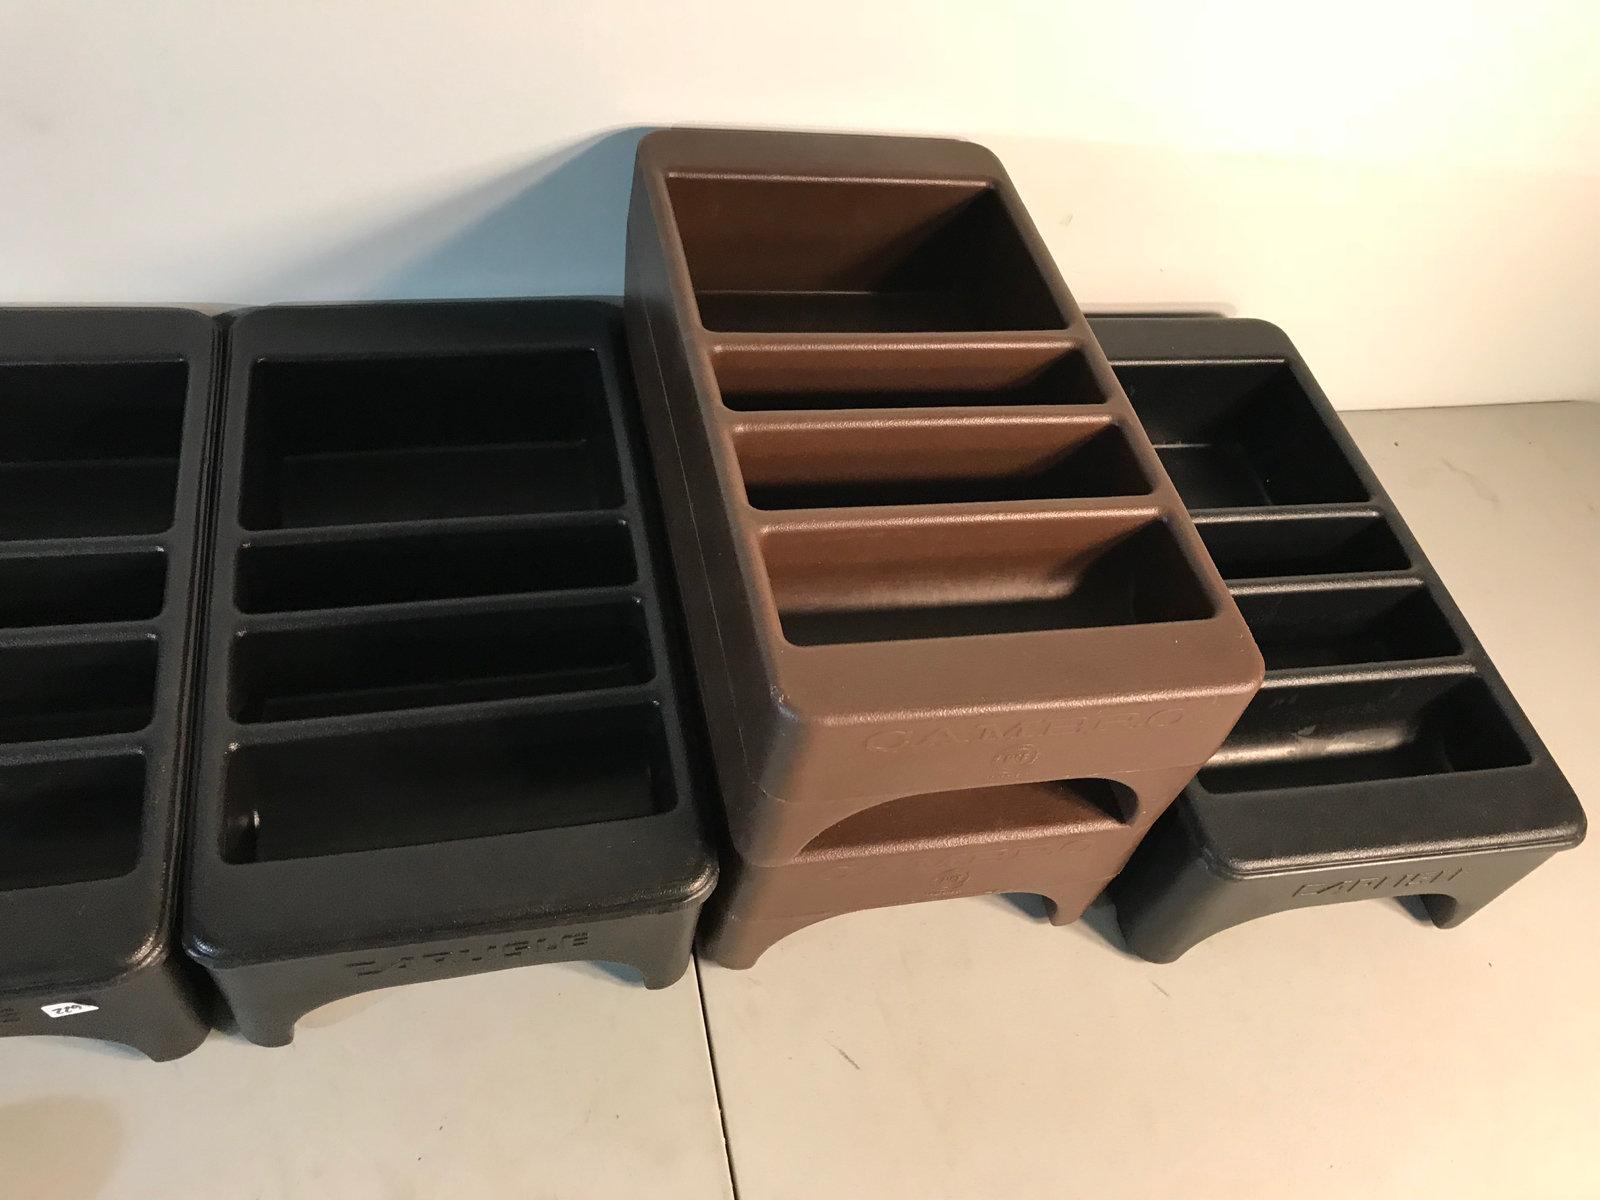 Carlisle and Cambro Flatware and napkin trays, 3 brown and 5 black